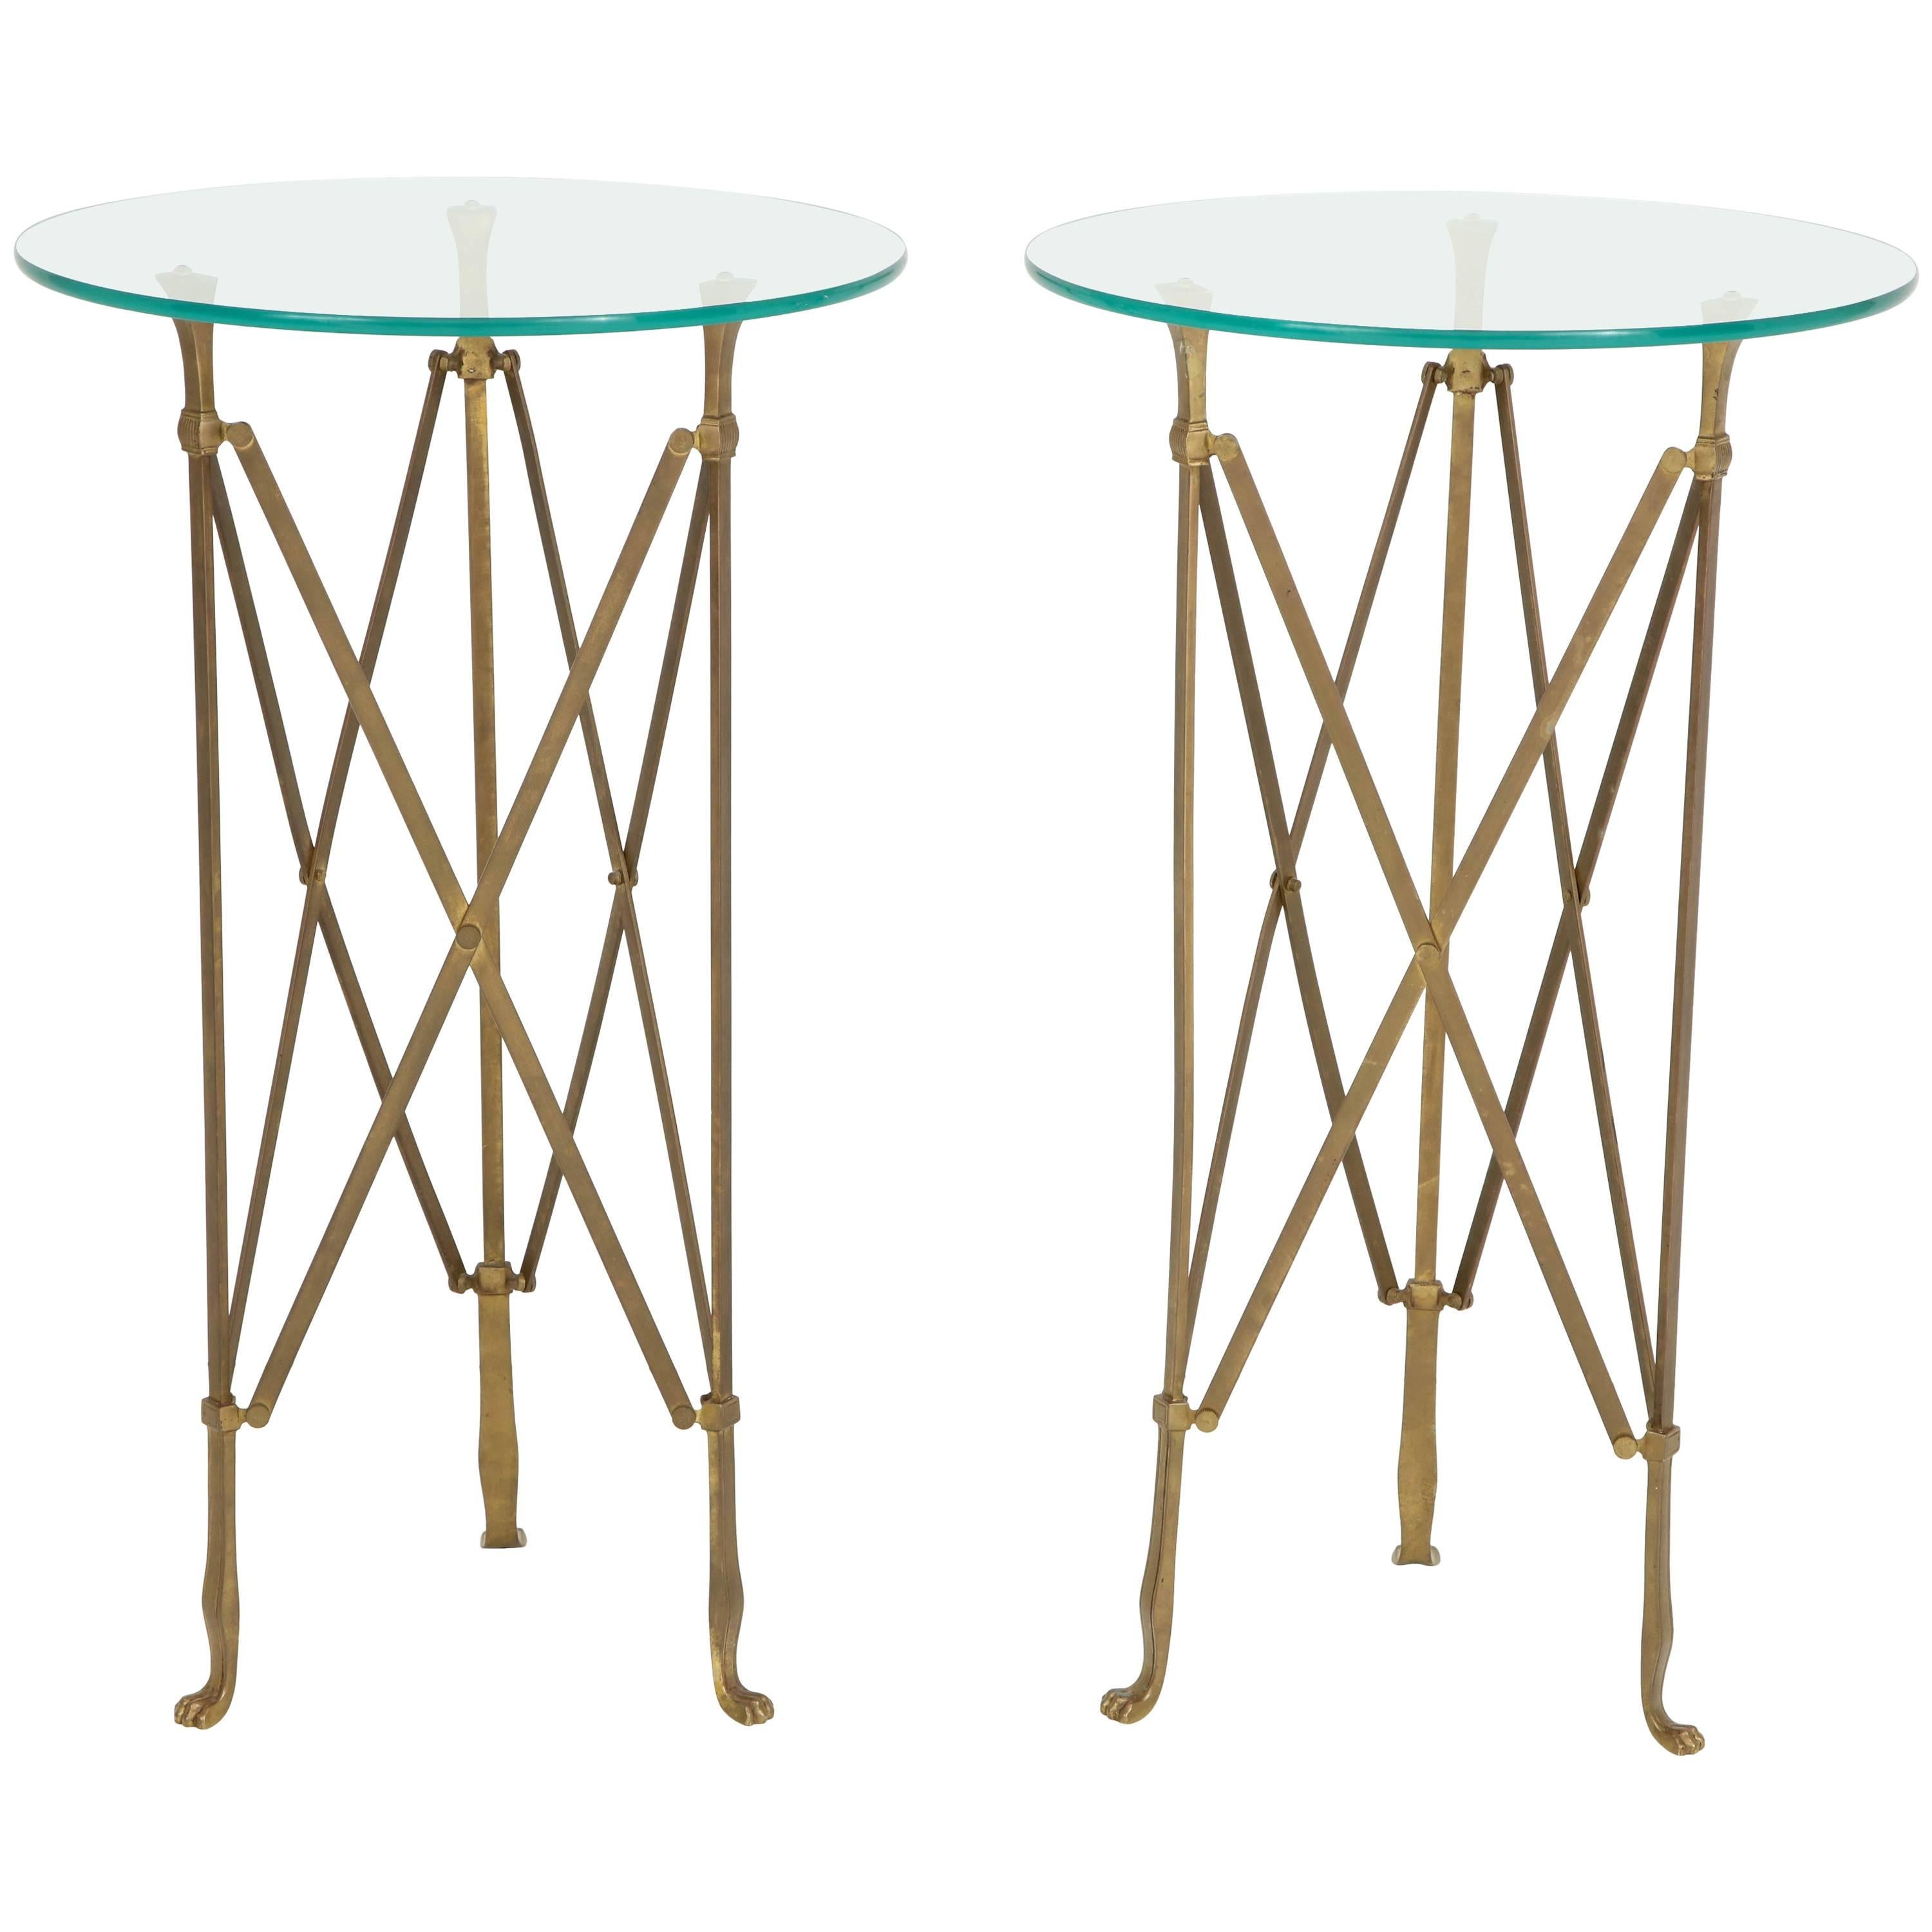 Pair of Neoclassical Side Tables Attributed to Jansen